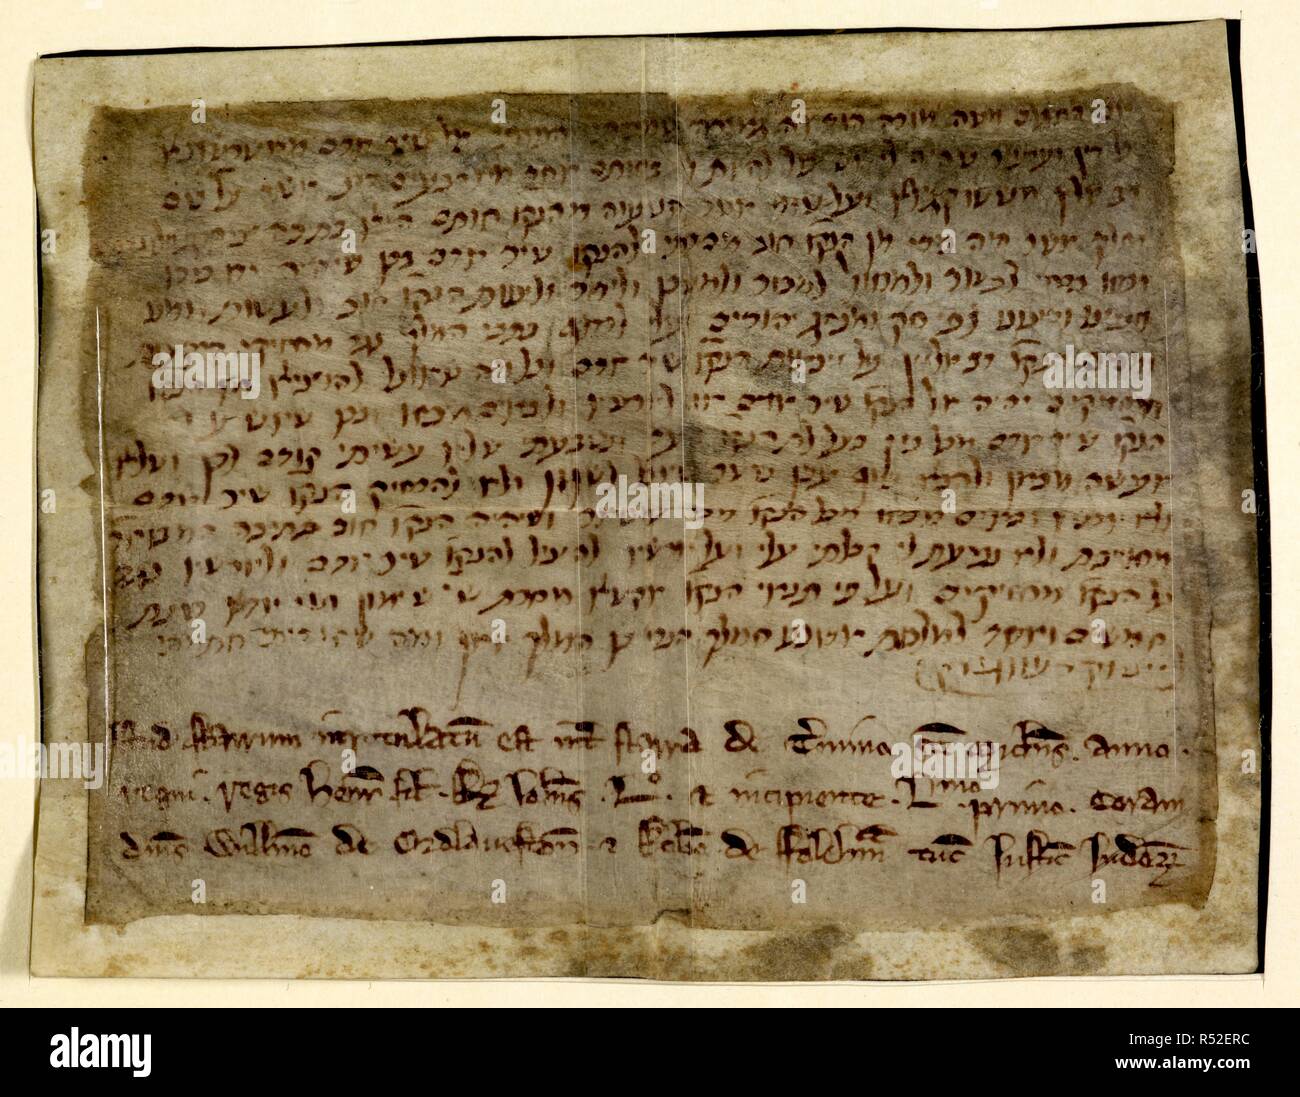 These thirteenth century charters record transactions with Jewish moneylenders. The majority are written solely in Hebrew but this one, in which Isaac of Southwark renounces his claim to a debt, contains additional words in Latin. 13th century. Source: Harley Charter 43 A 68. Language: Hebrew and Latin. Stock Photo